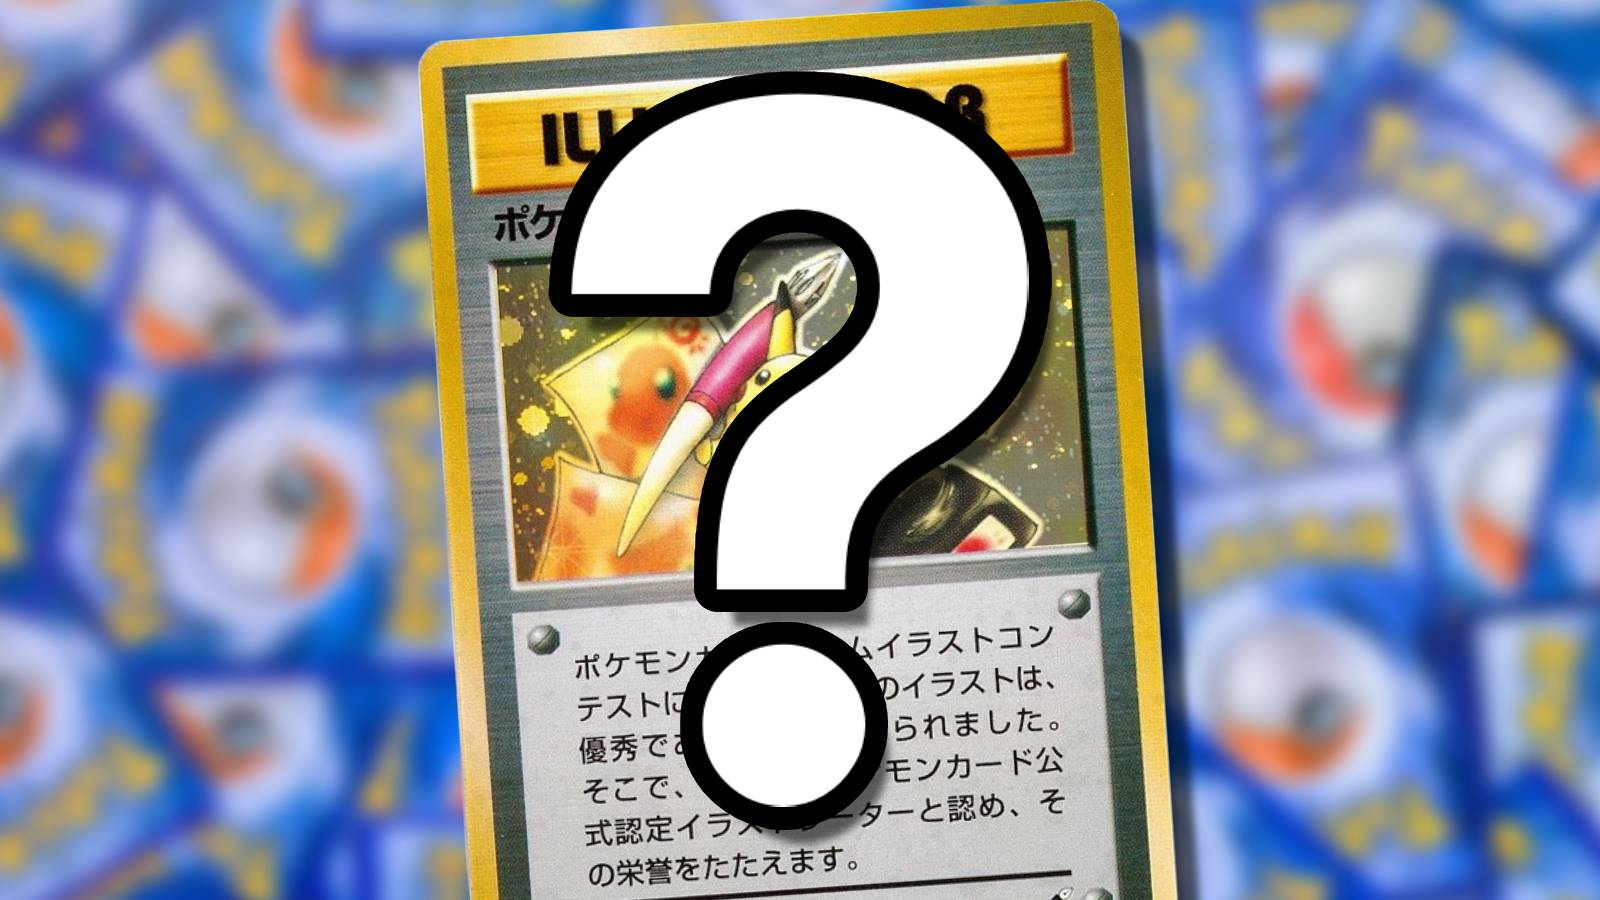 A Pokemon card appears against a blurred background alongside a large question mark